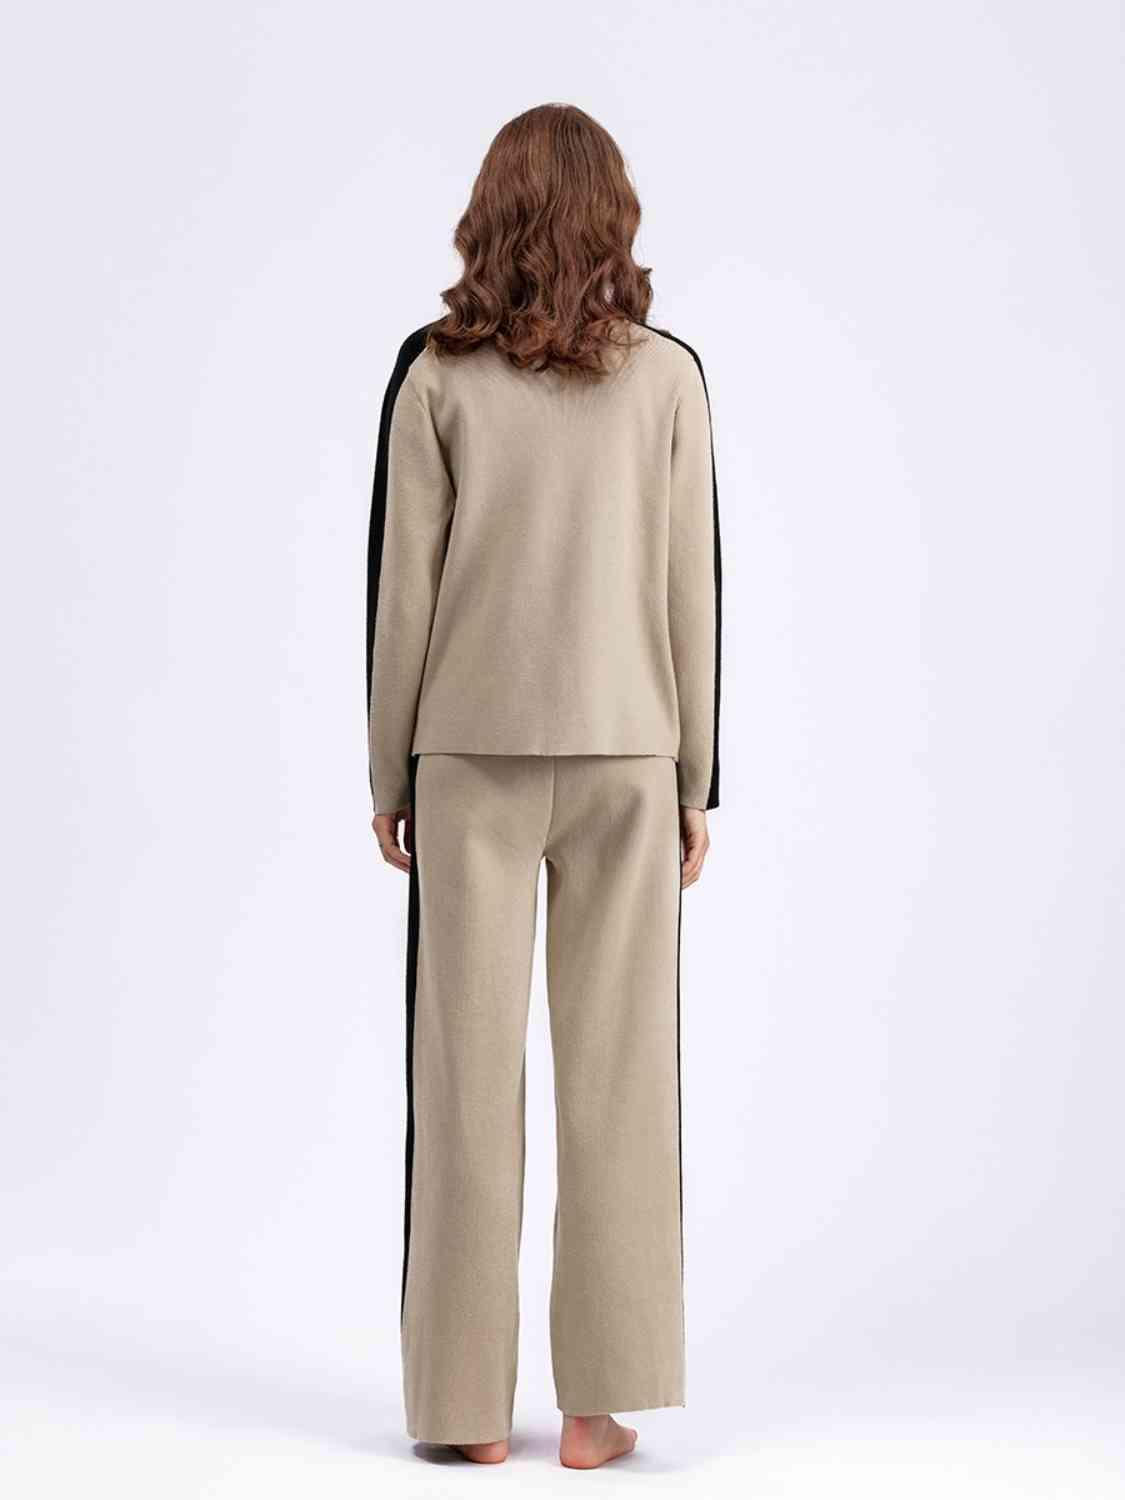 Cold Weather Outfit Matching Sweater and Pants Set-MXSTUDIO.COM